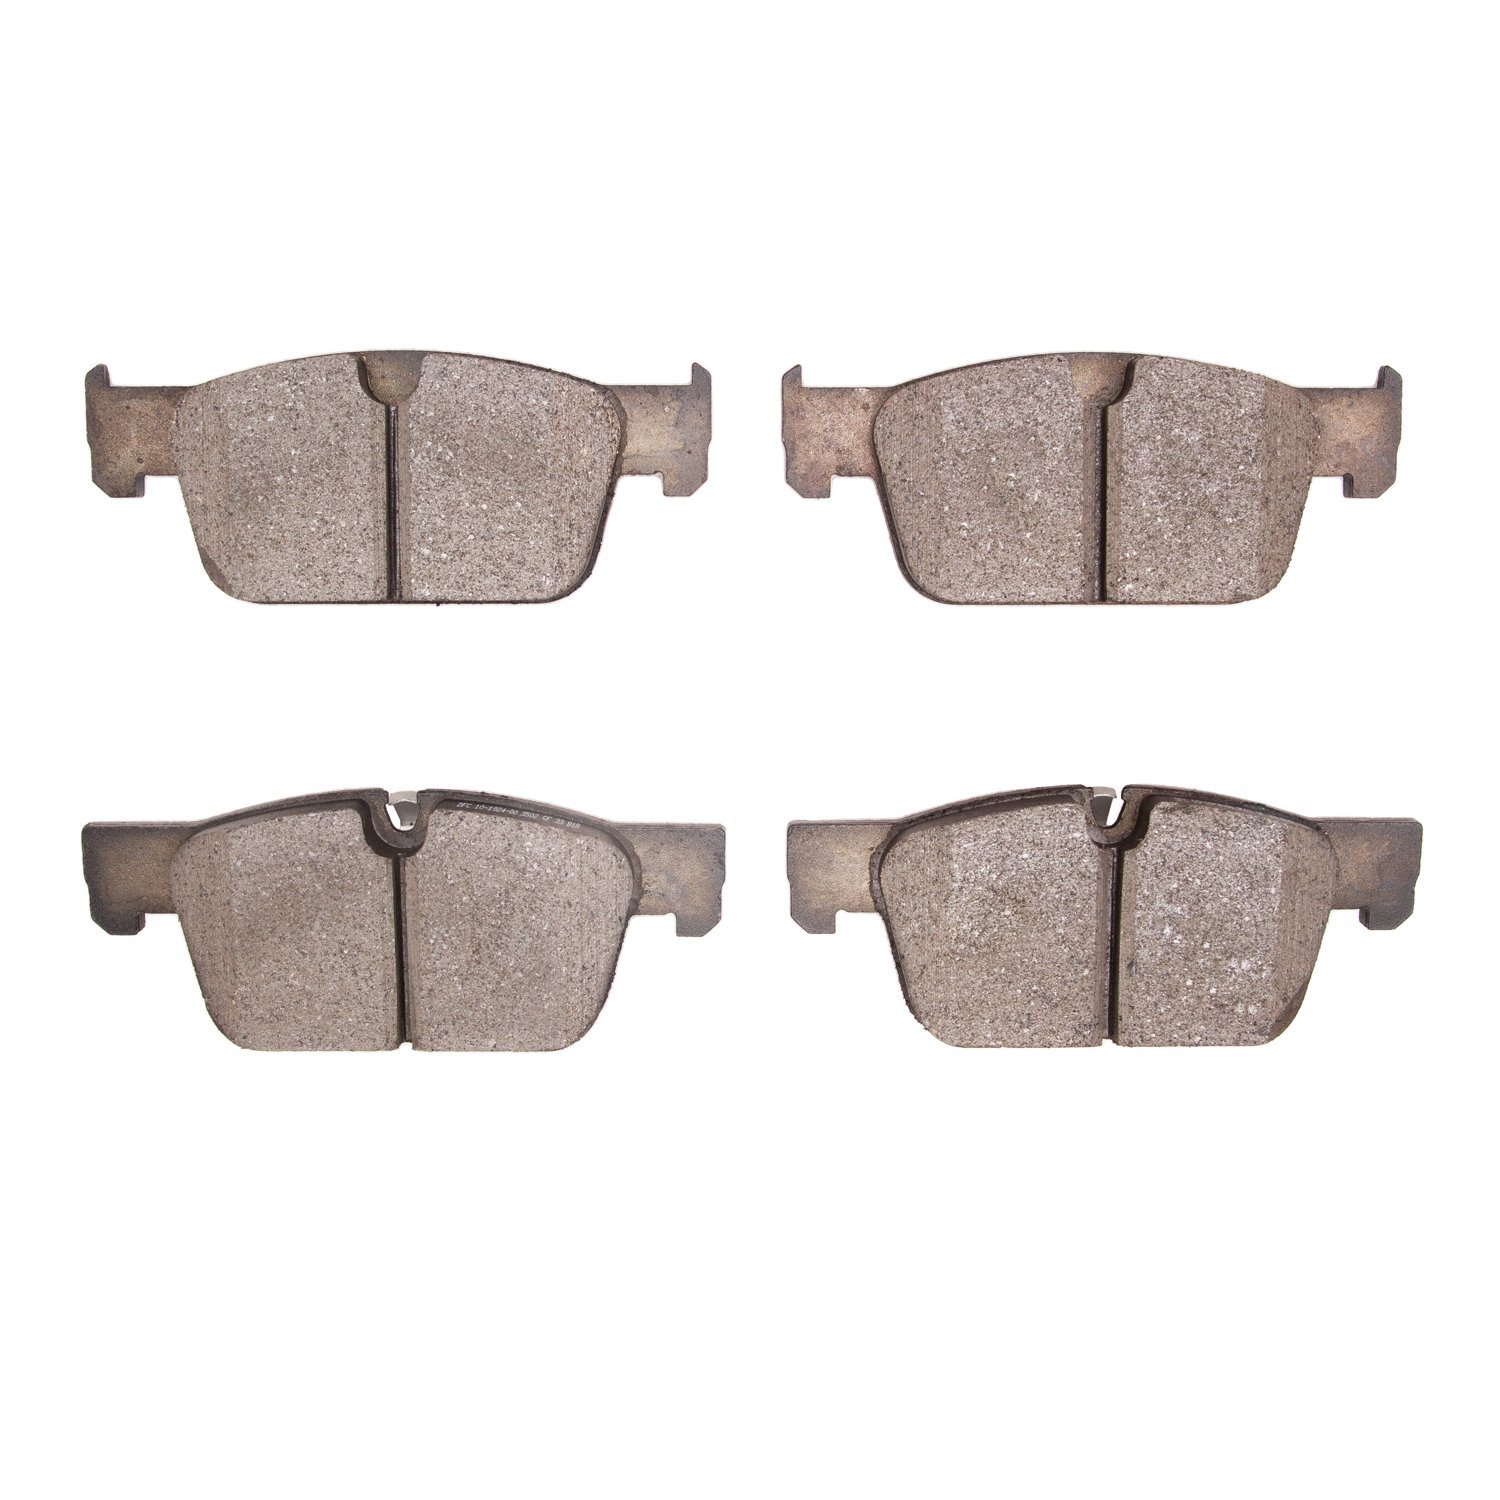 1551-1924-00 5000 Advanced Ceramic Brake Pads, Fits Select Volvo, Position: Front